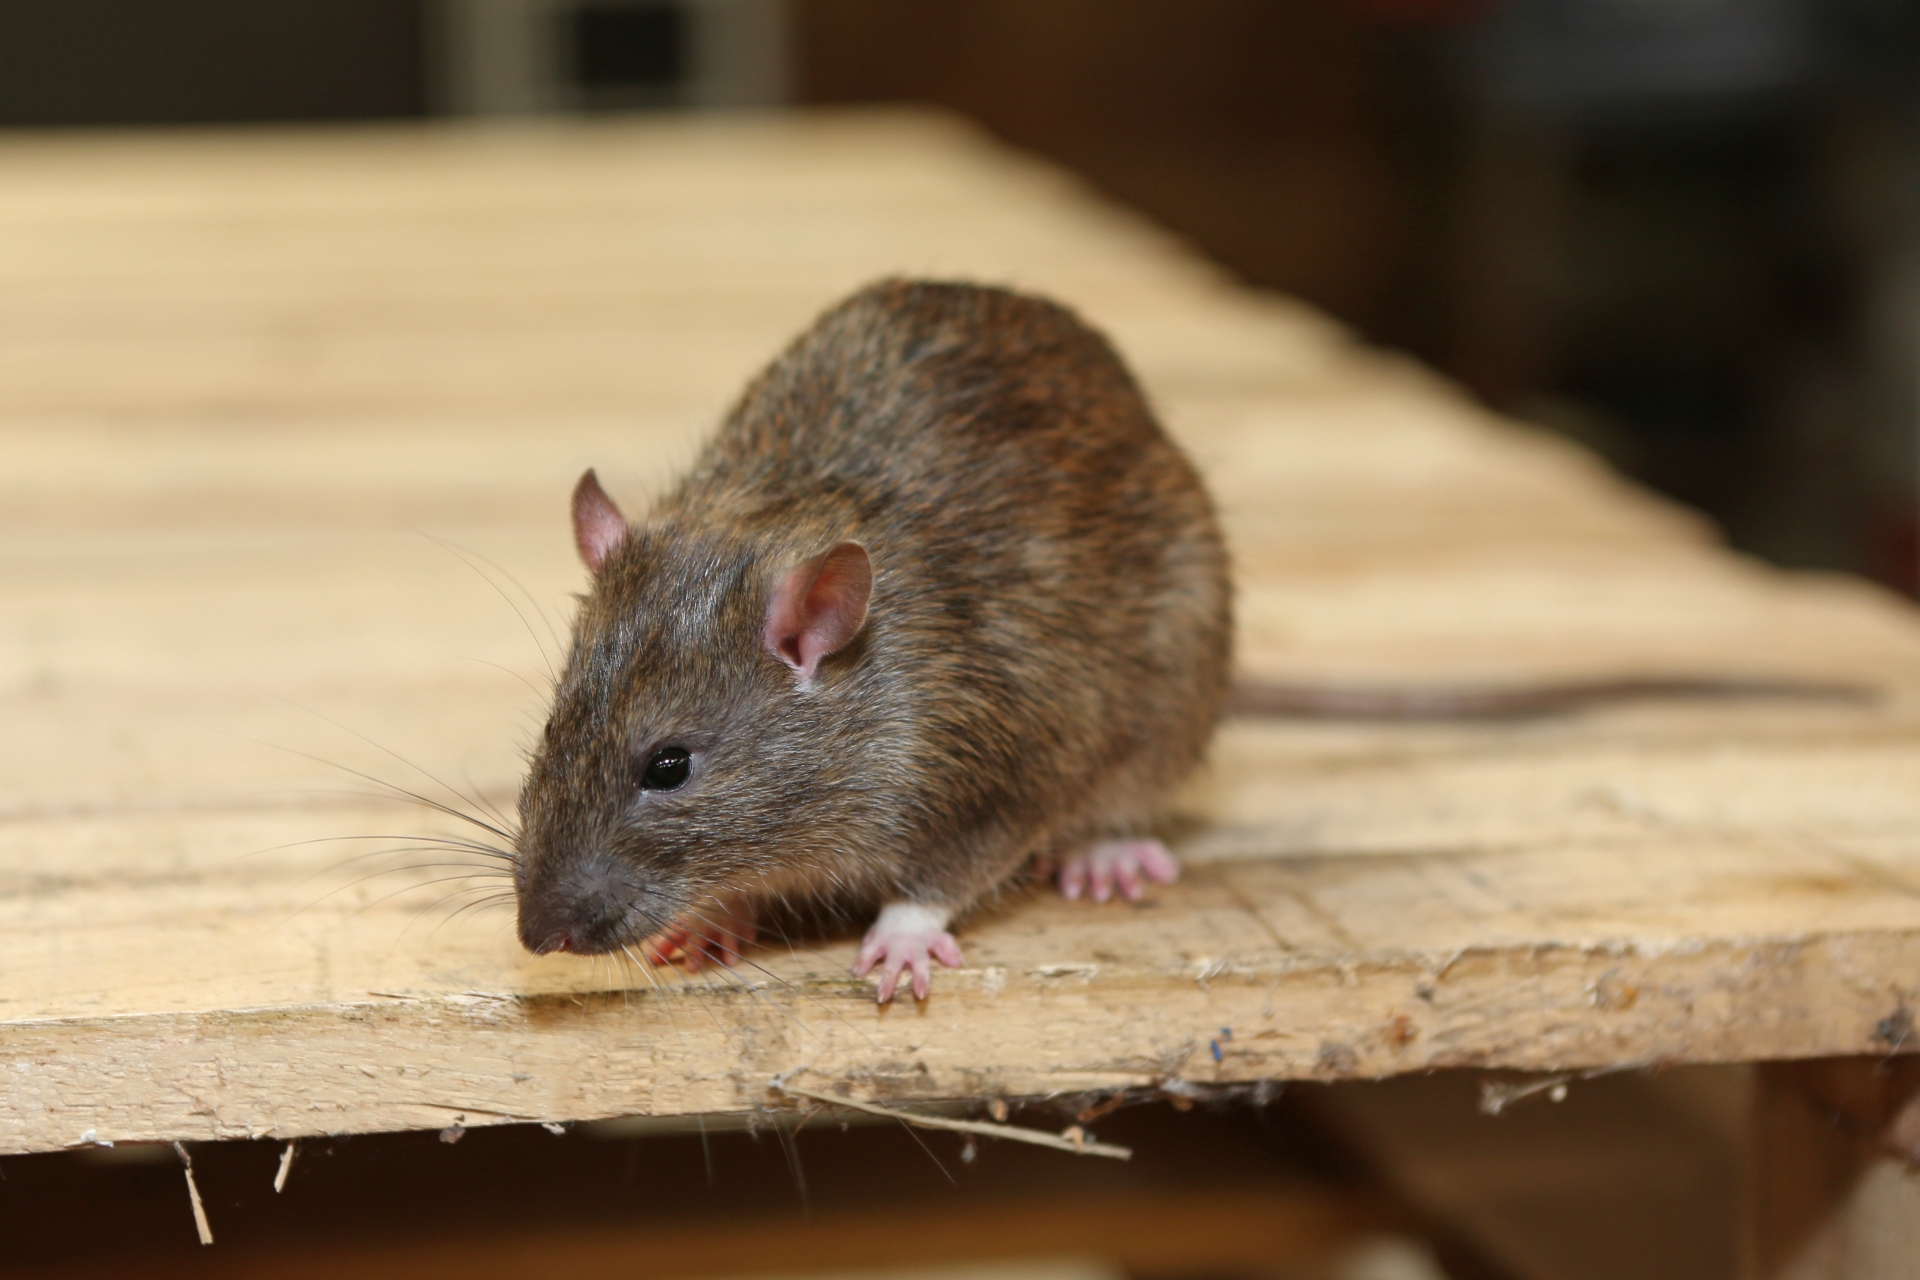 Rat Control, Pest Control in Purley, Kenley, CR8. Call Now 020 8166 9746